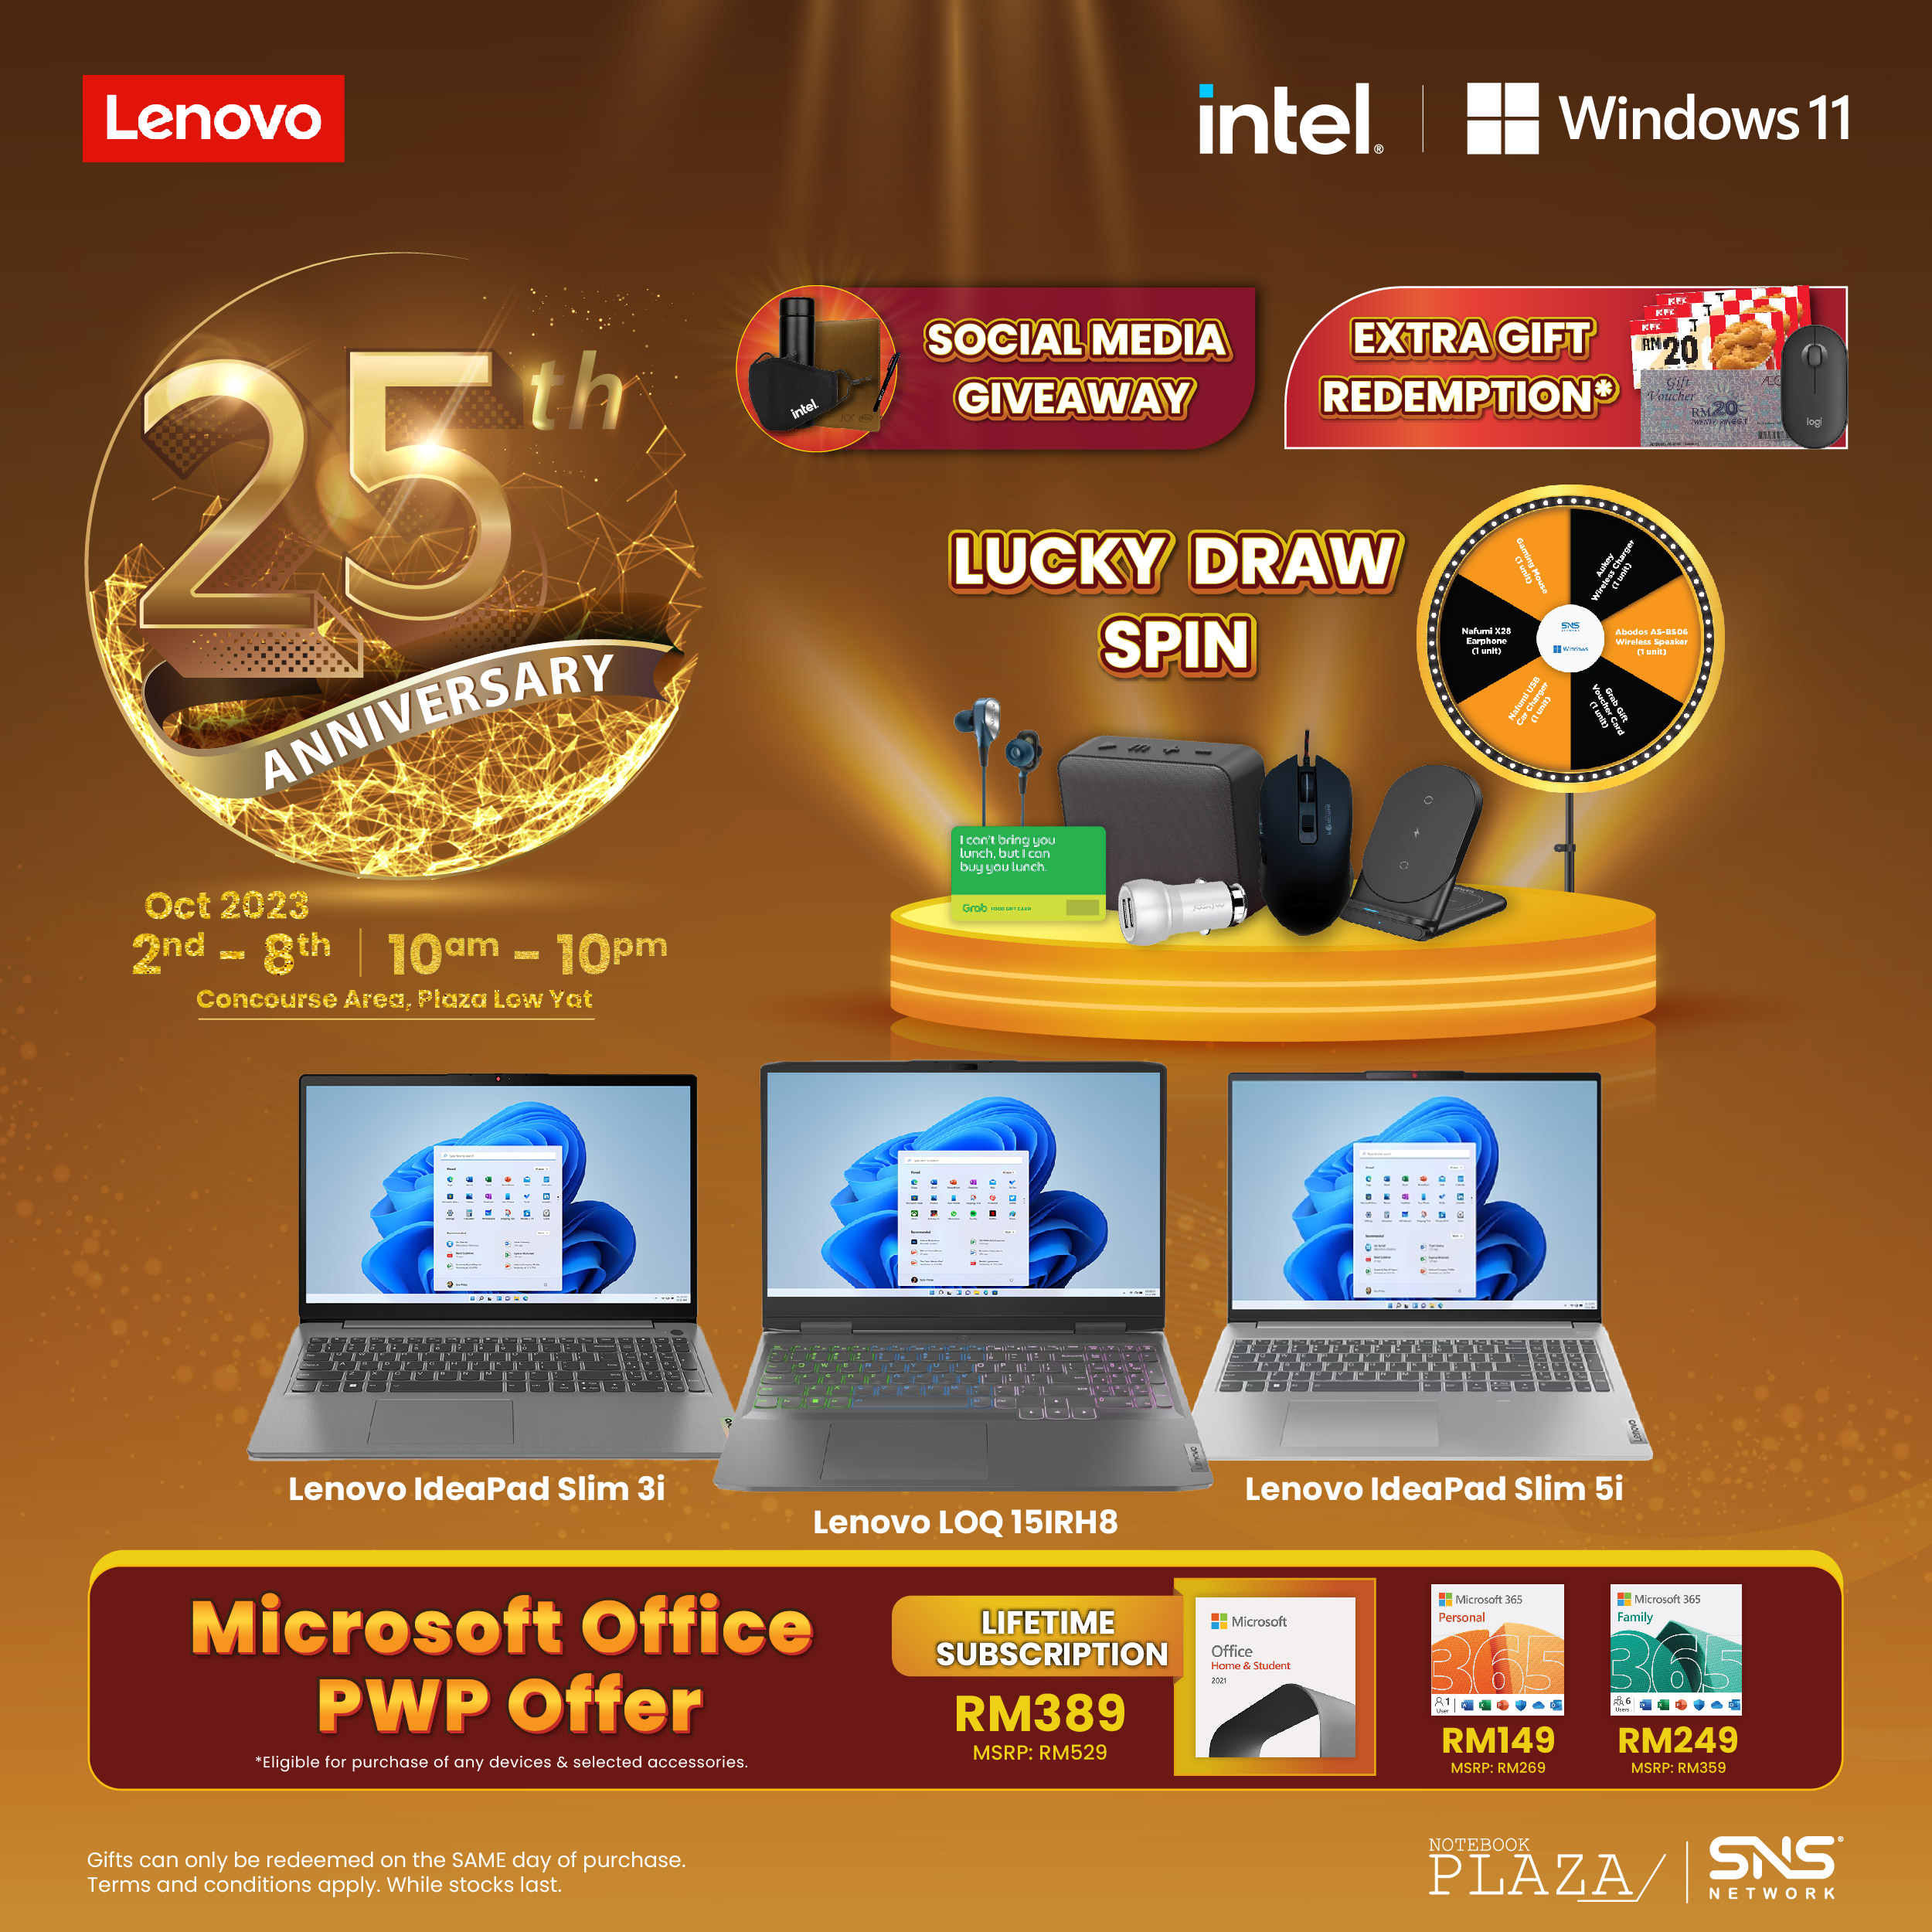 Collaborate, create & play with these powerful laptops from lenovo priced at less than rm3,500!